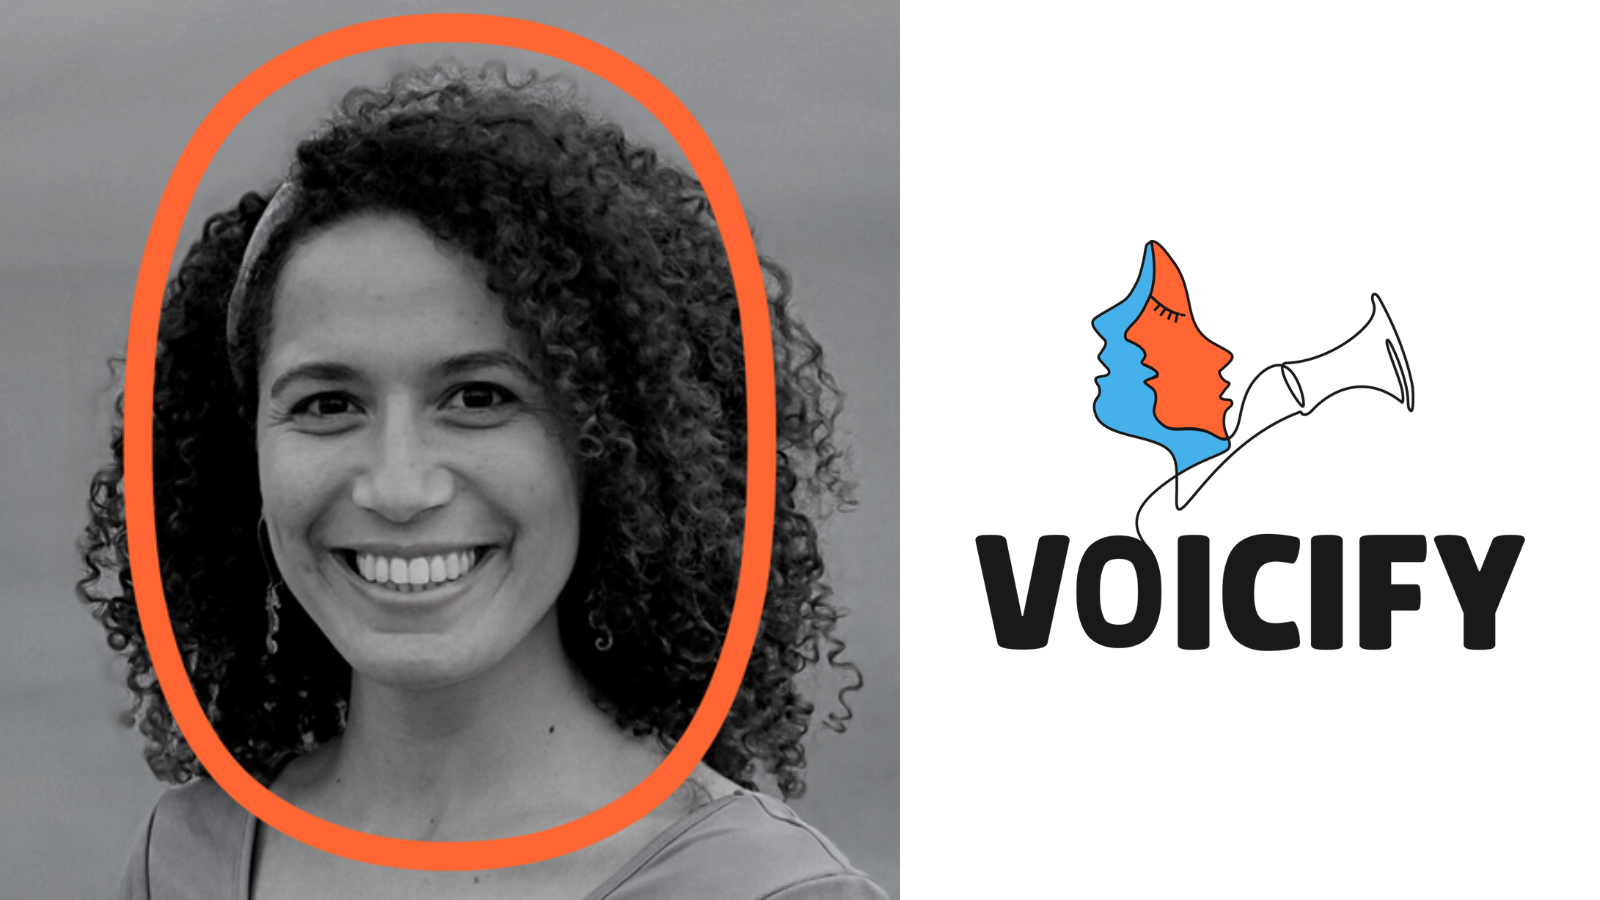 Empowering Youth with Lived Migration Experiences: Interview with Syrine Rekhis, President of VOICIFY – The European Forum for Youth with Lived Migration Experiences